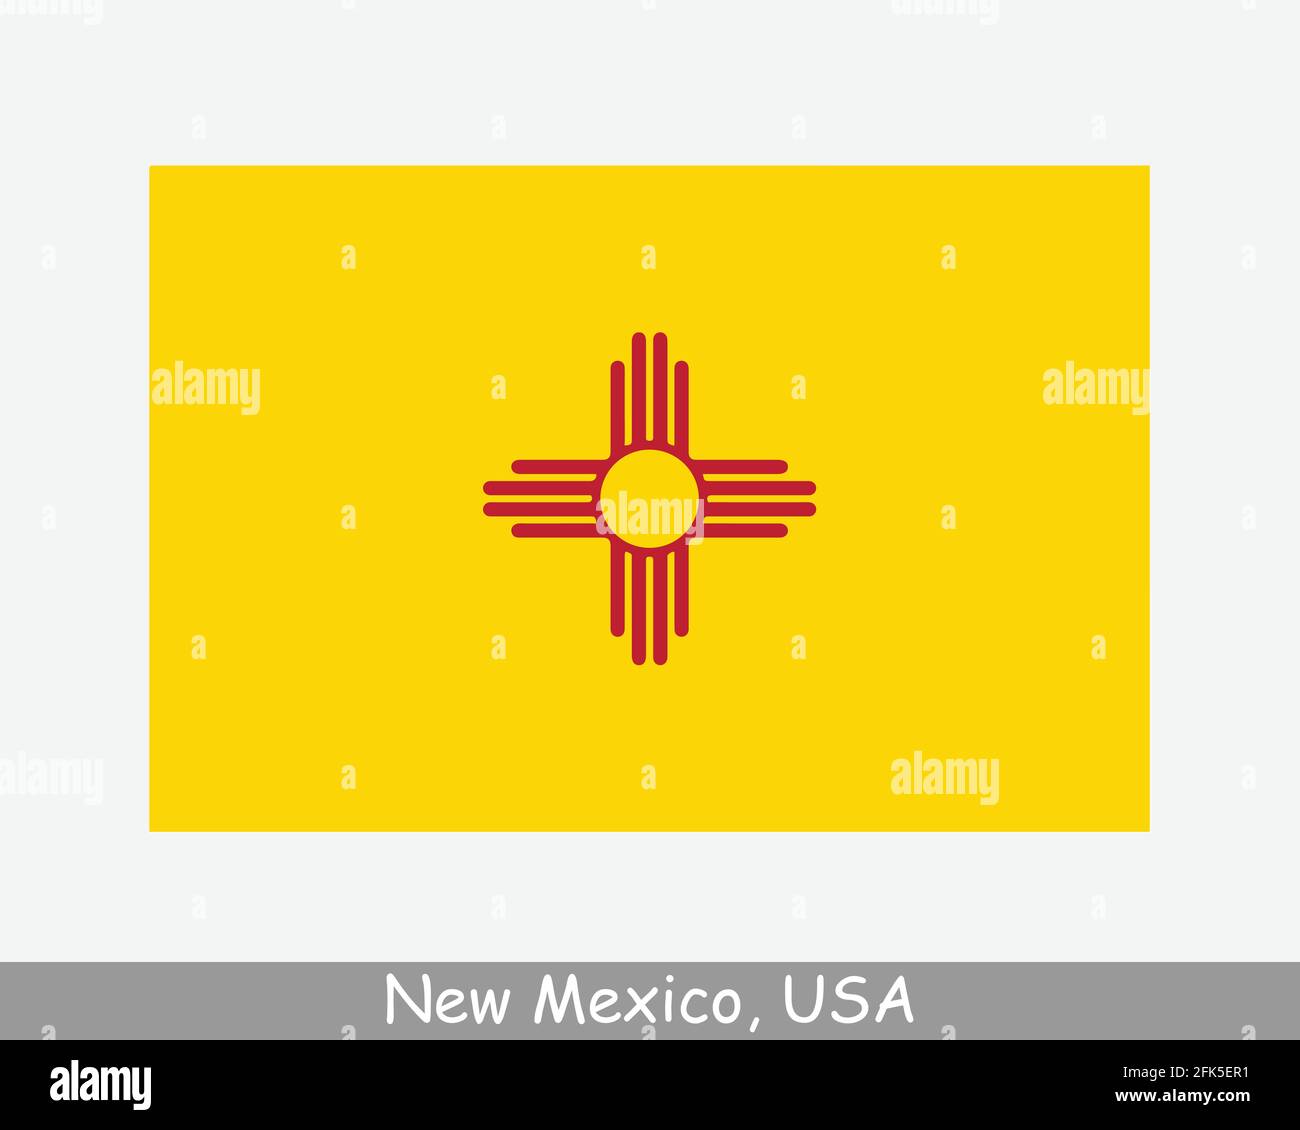 New Mexico USA State Flag. Flag of NM, USA isolated on white background. United States, America, American, United States of America, US State. Vector Stock Vector